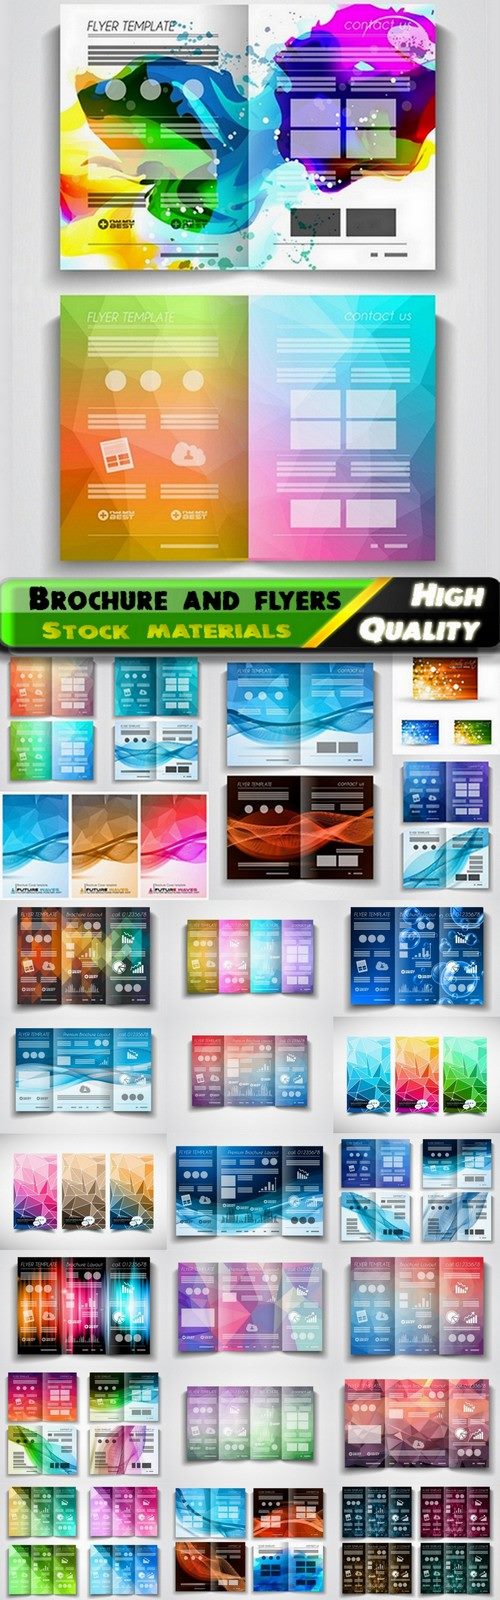 Brochure and flyers template design in vector from stock 53